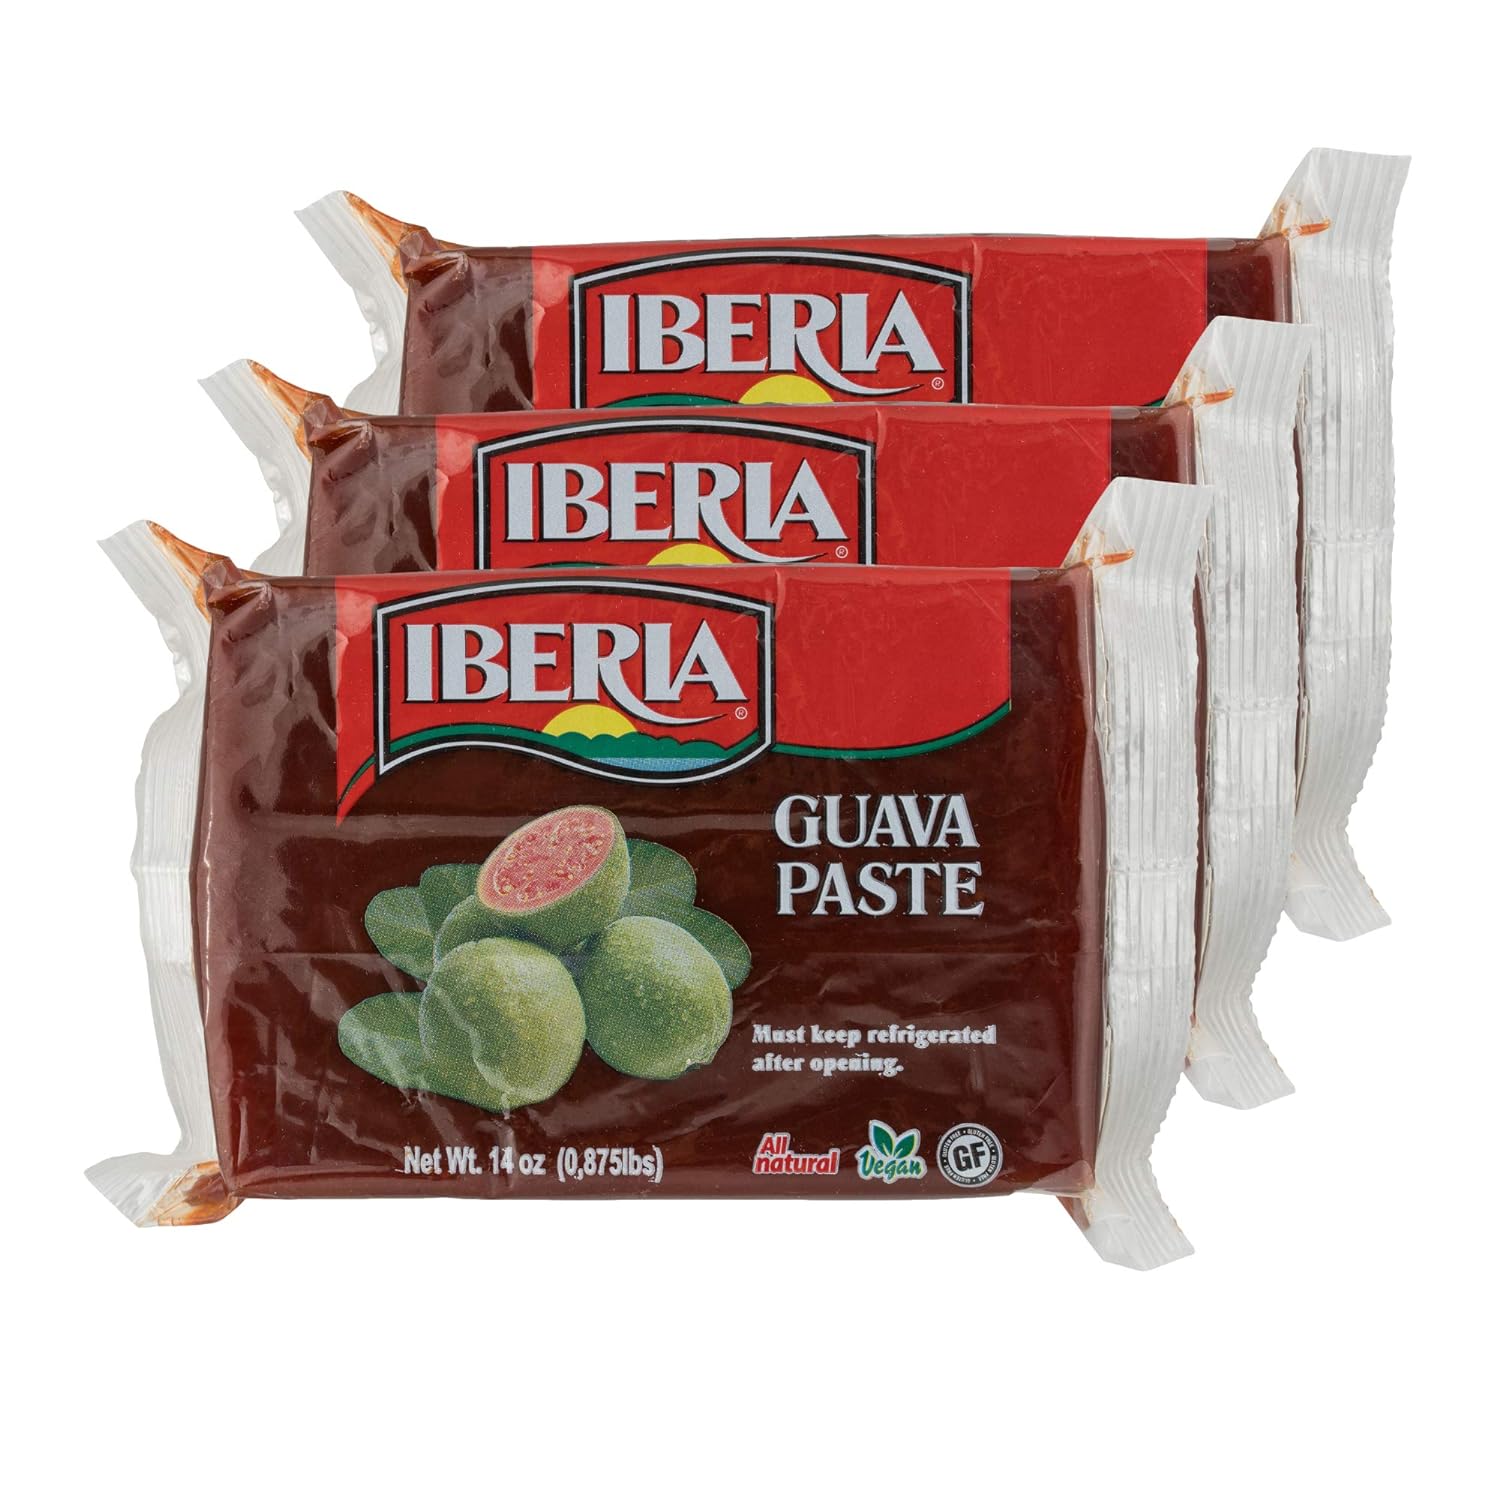 Iberia Guava Paste,14 Ounce (Pack of 3)